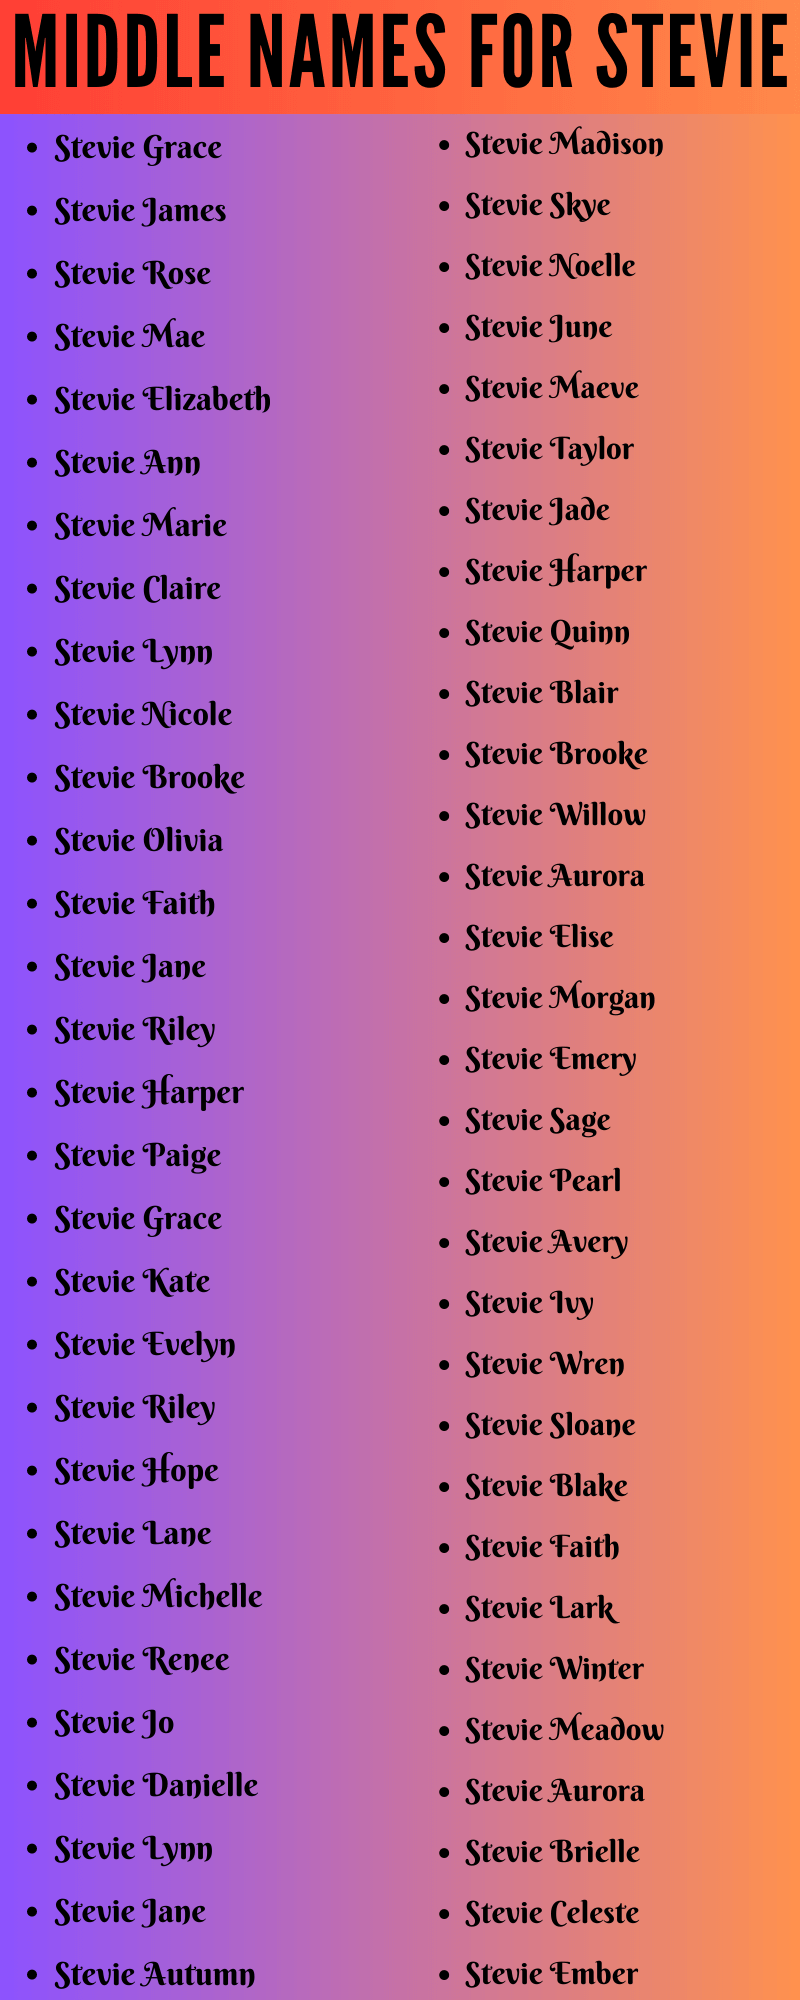 400 Best Middle Names For Stevie